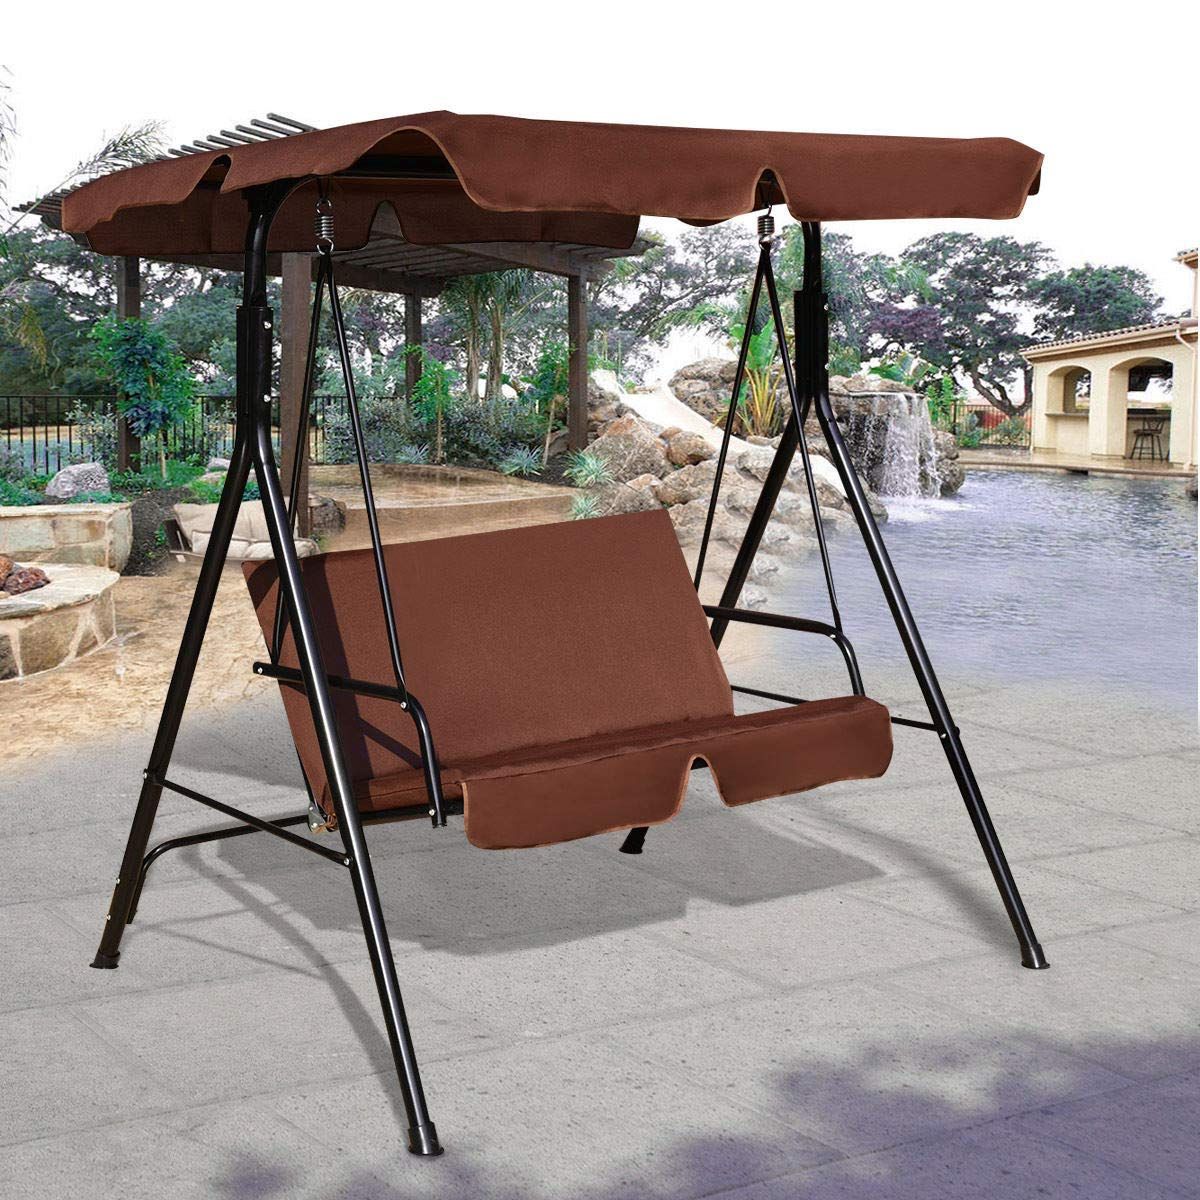 Patio Loveseat Canopy Hammock Porch Swings With Stand Throughout Widely Used Amazon : Iron Porch Swing With Steel Frame Stand And (View 2 of 30)